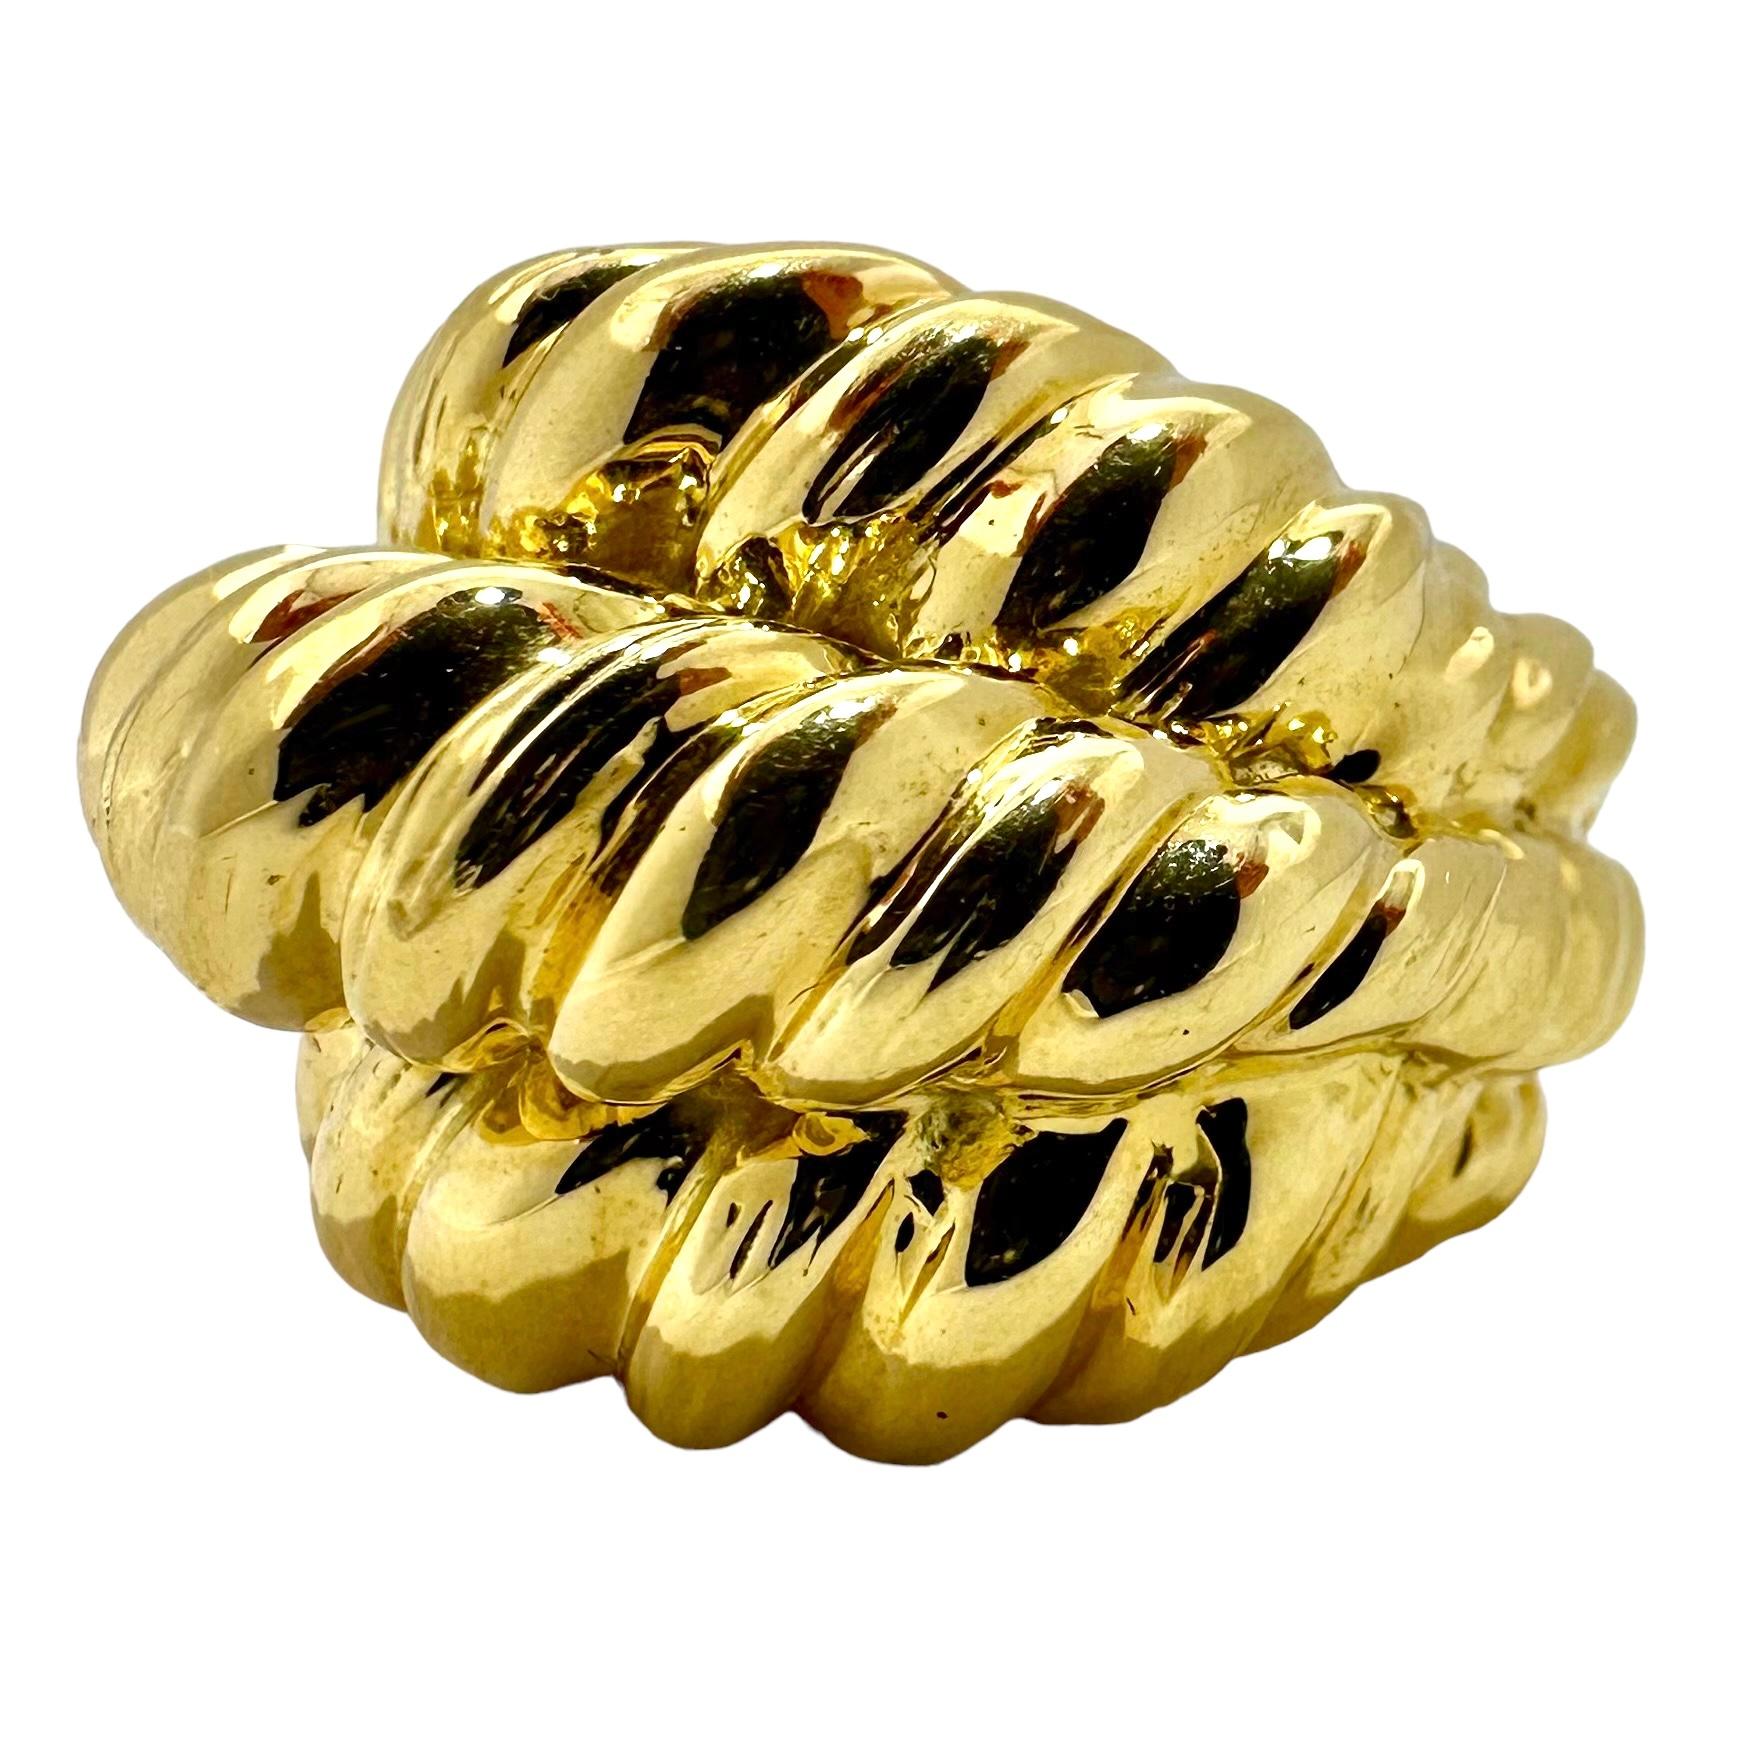 A shrimp style 18 karat yellow gold statement ring comprised of three rows of twisted rope design in a high dome. Tapers in width from 7/8 of an inch at the widest point in front down to a comfortable 3/8 of an inch at the rear. The high dome